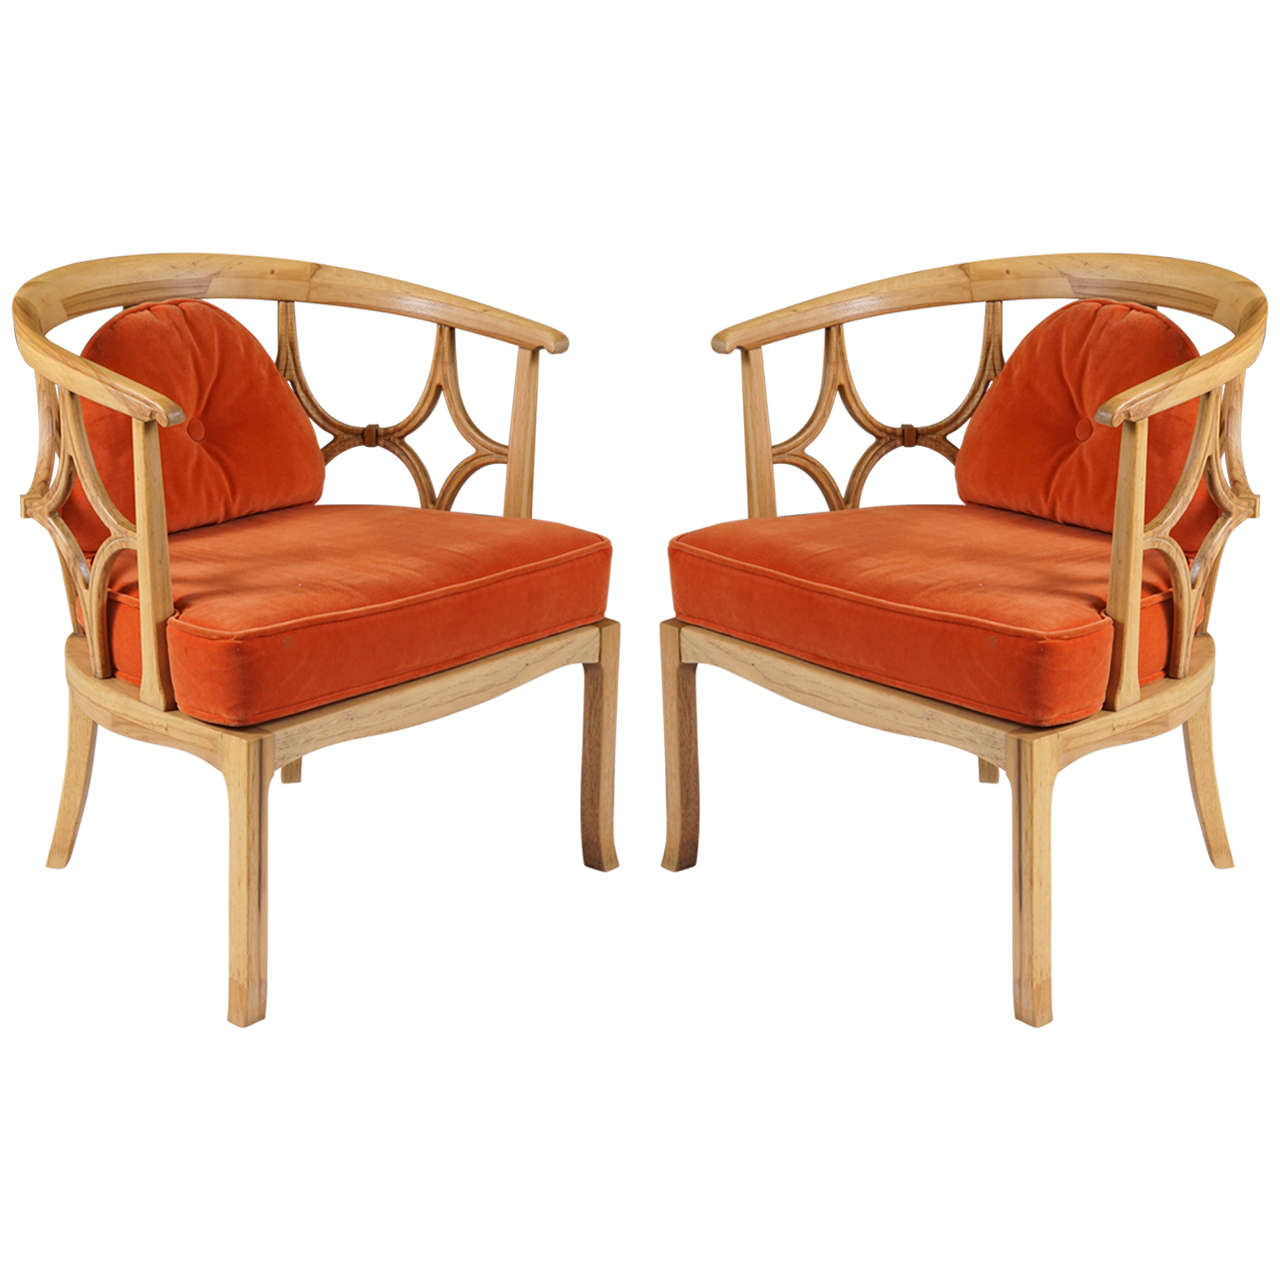 Pair of mid century modern chairs after Dorothy Draper For Sale